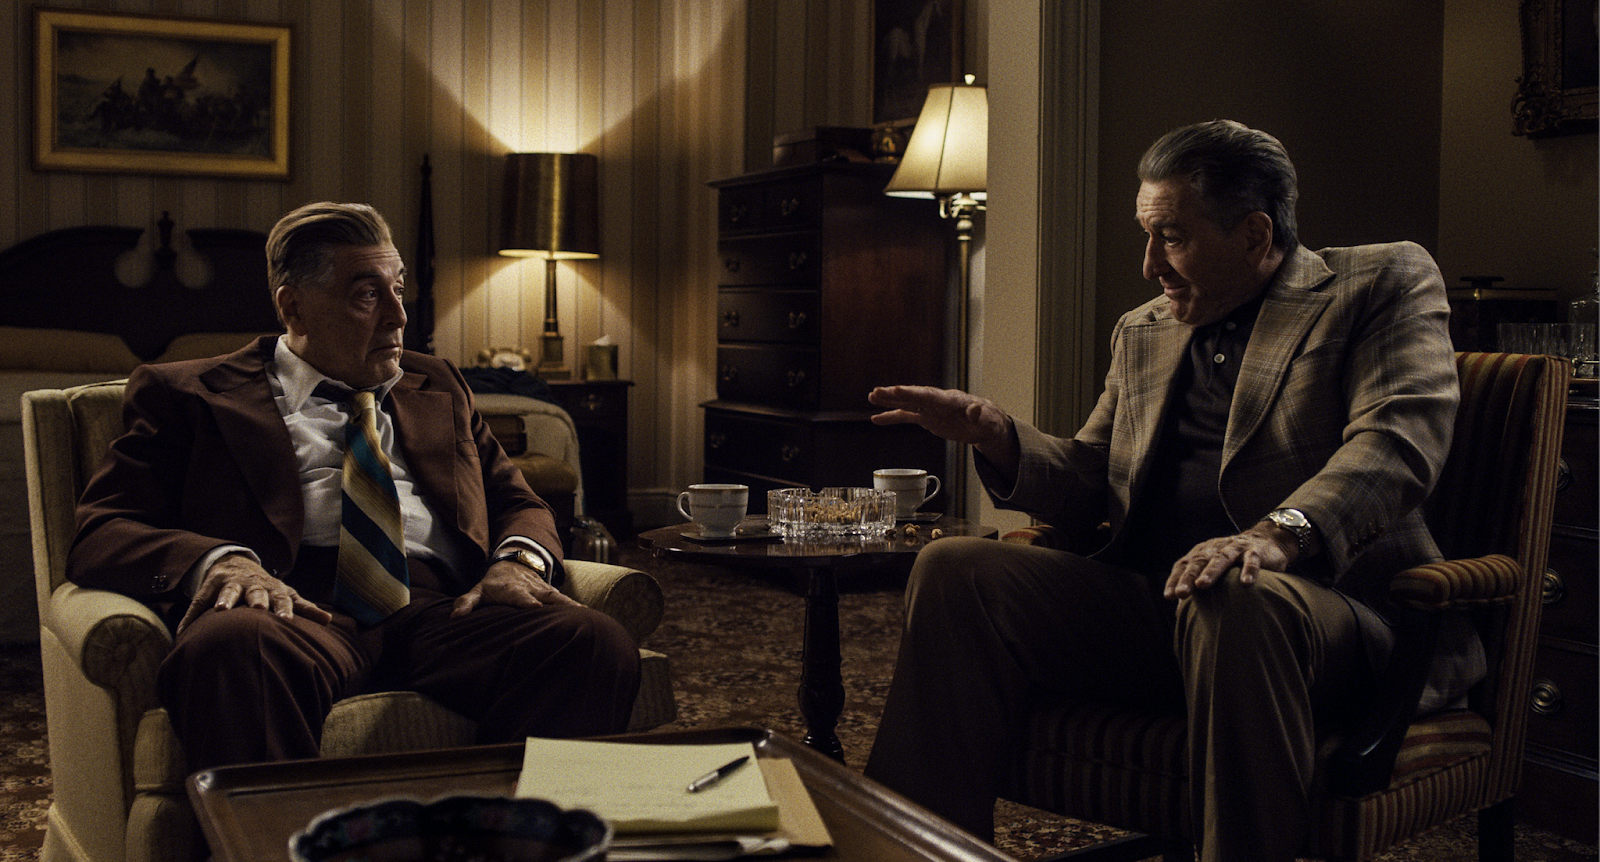 WATCH: The Final Trailer for THE IRISHMAN, Releases on Netflix Tomorrow, November 27, 2019